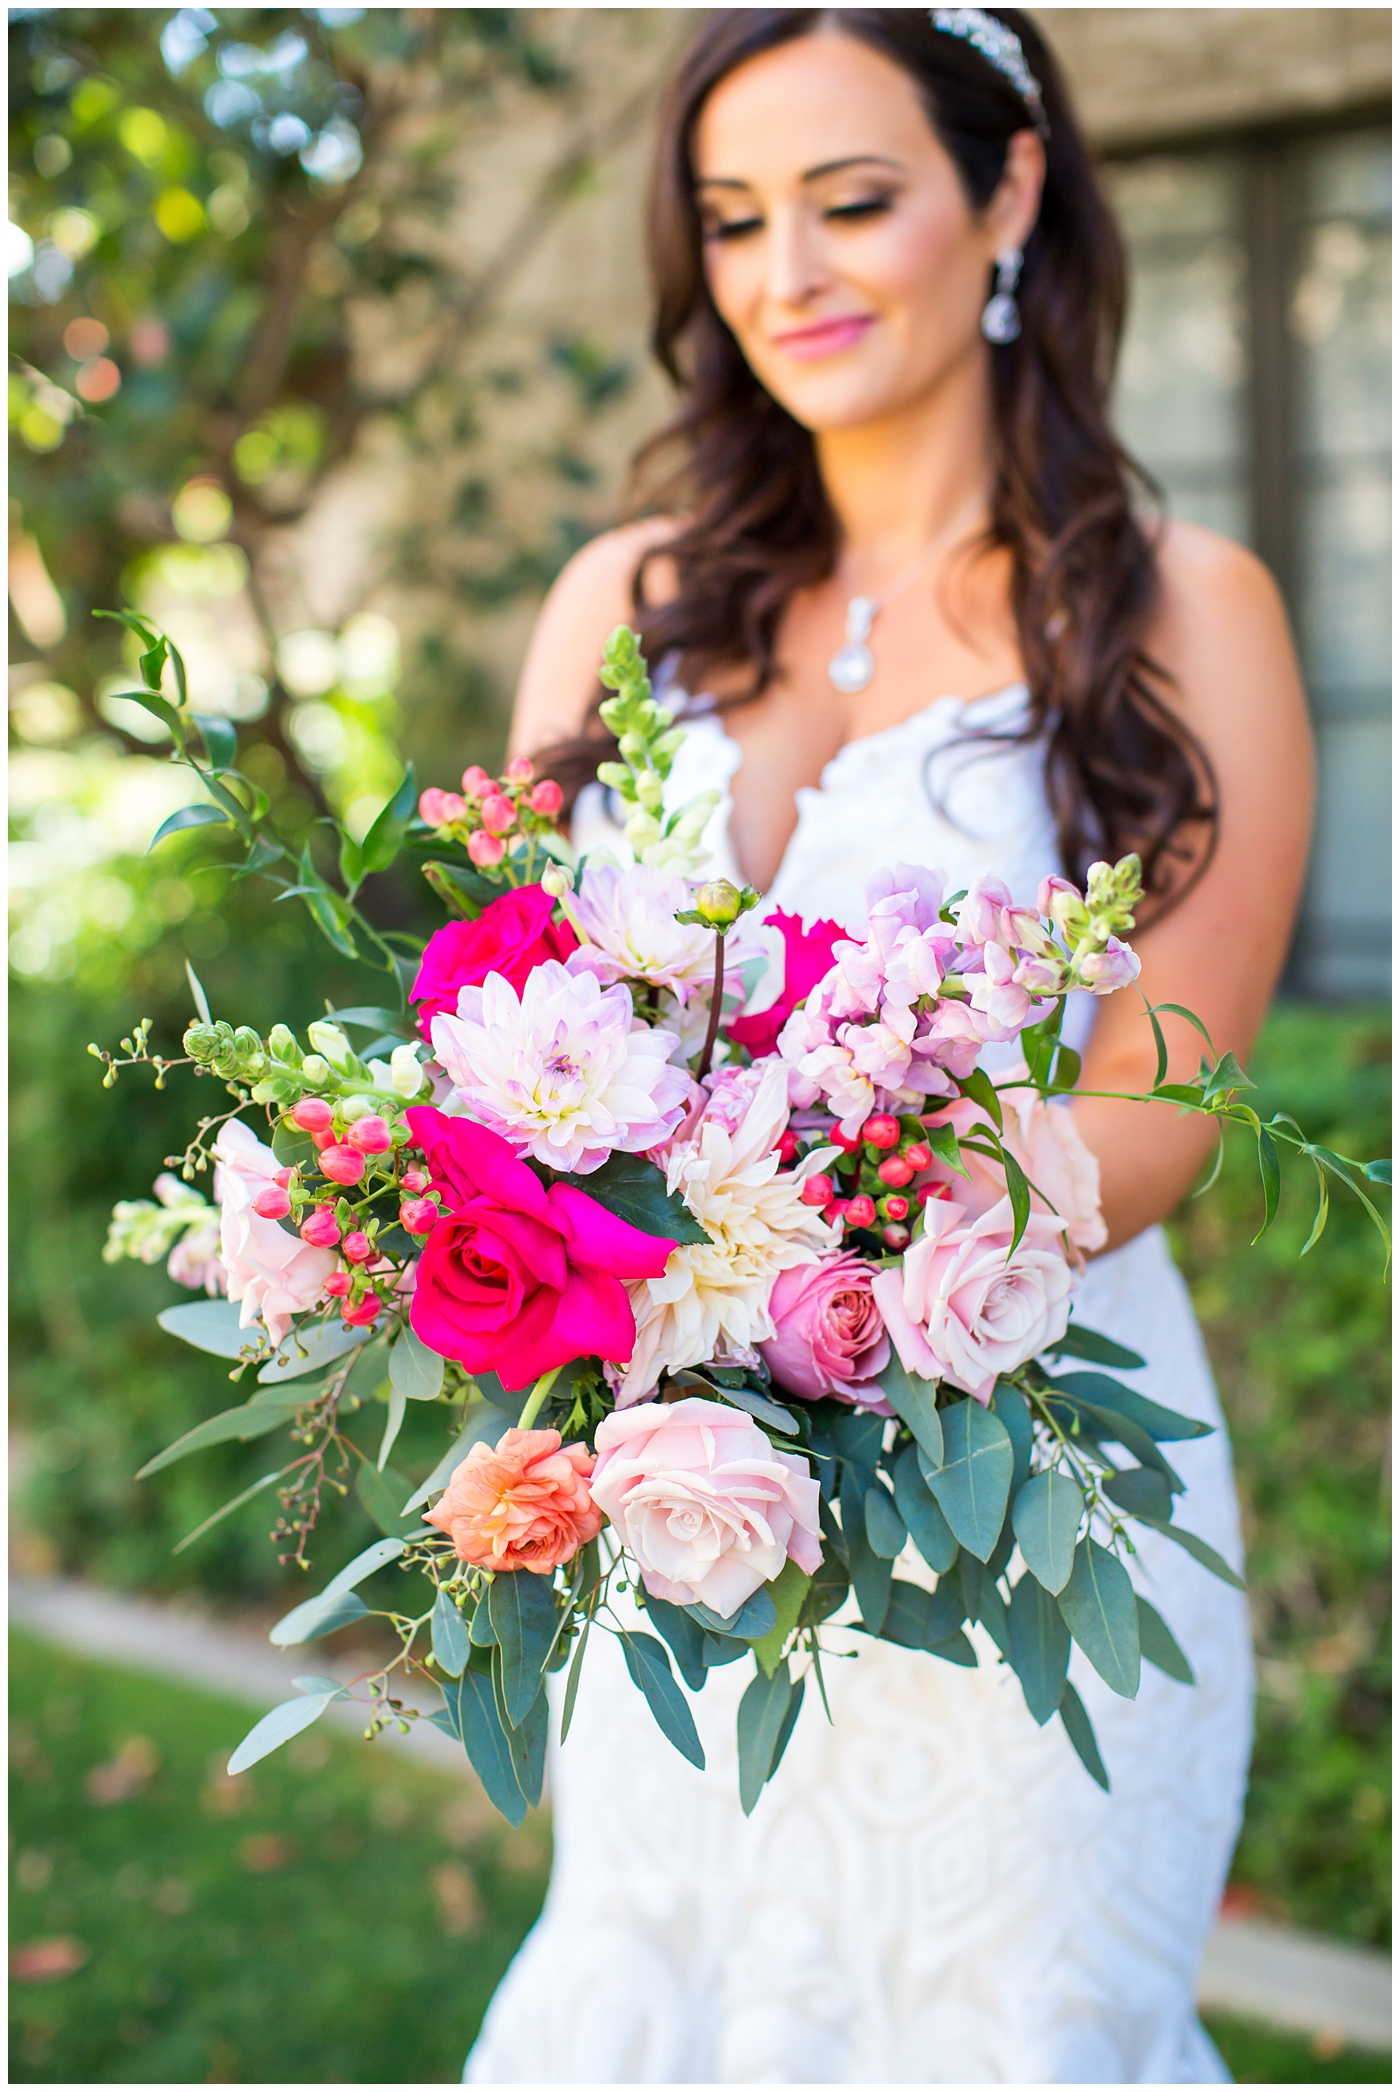 brunette long curly hair bride in wedding dress with thin straps with bright color roses, dahlia, snap dragons loose bouquet wedding day portrait